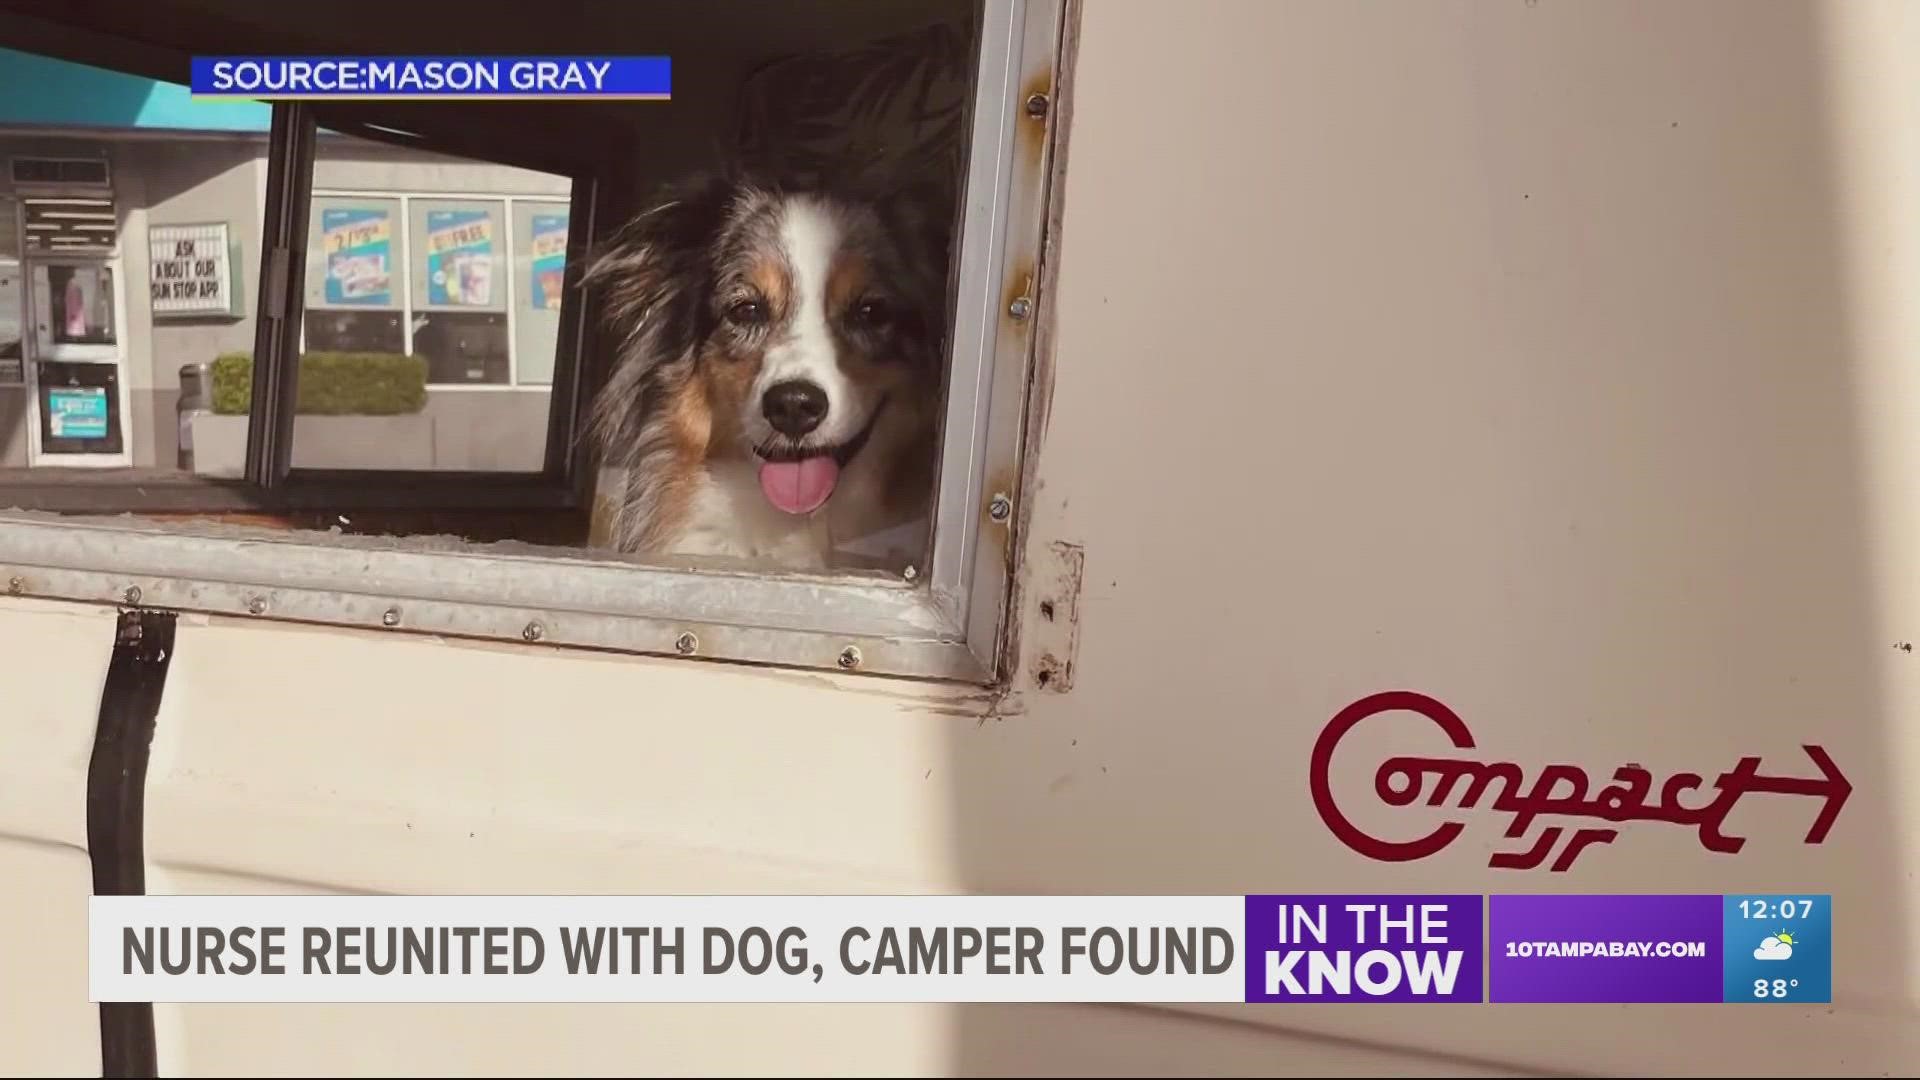 The camper with all her belongings and her dog was taken while she worked as a pediatric nurse.